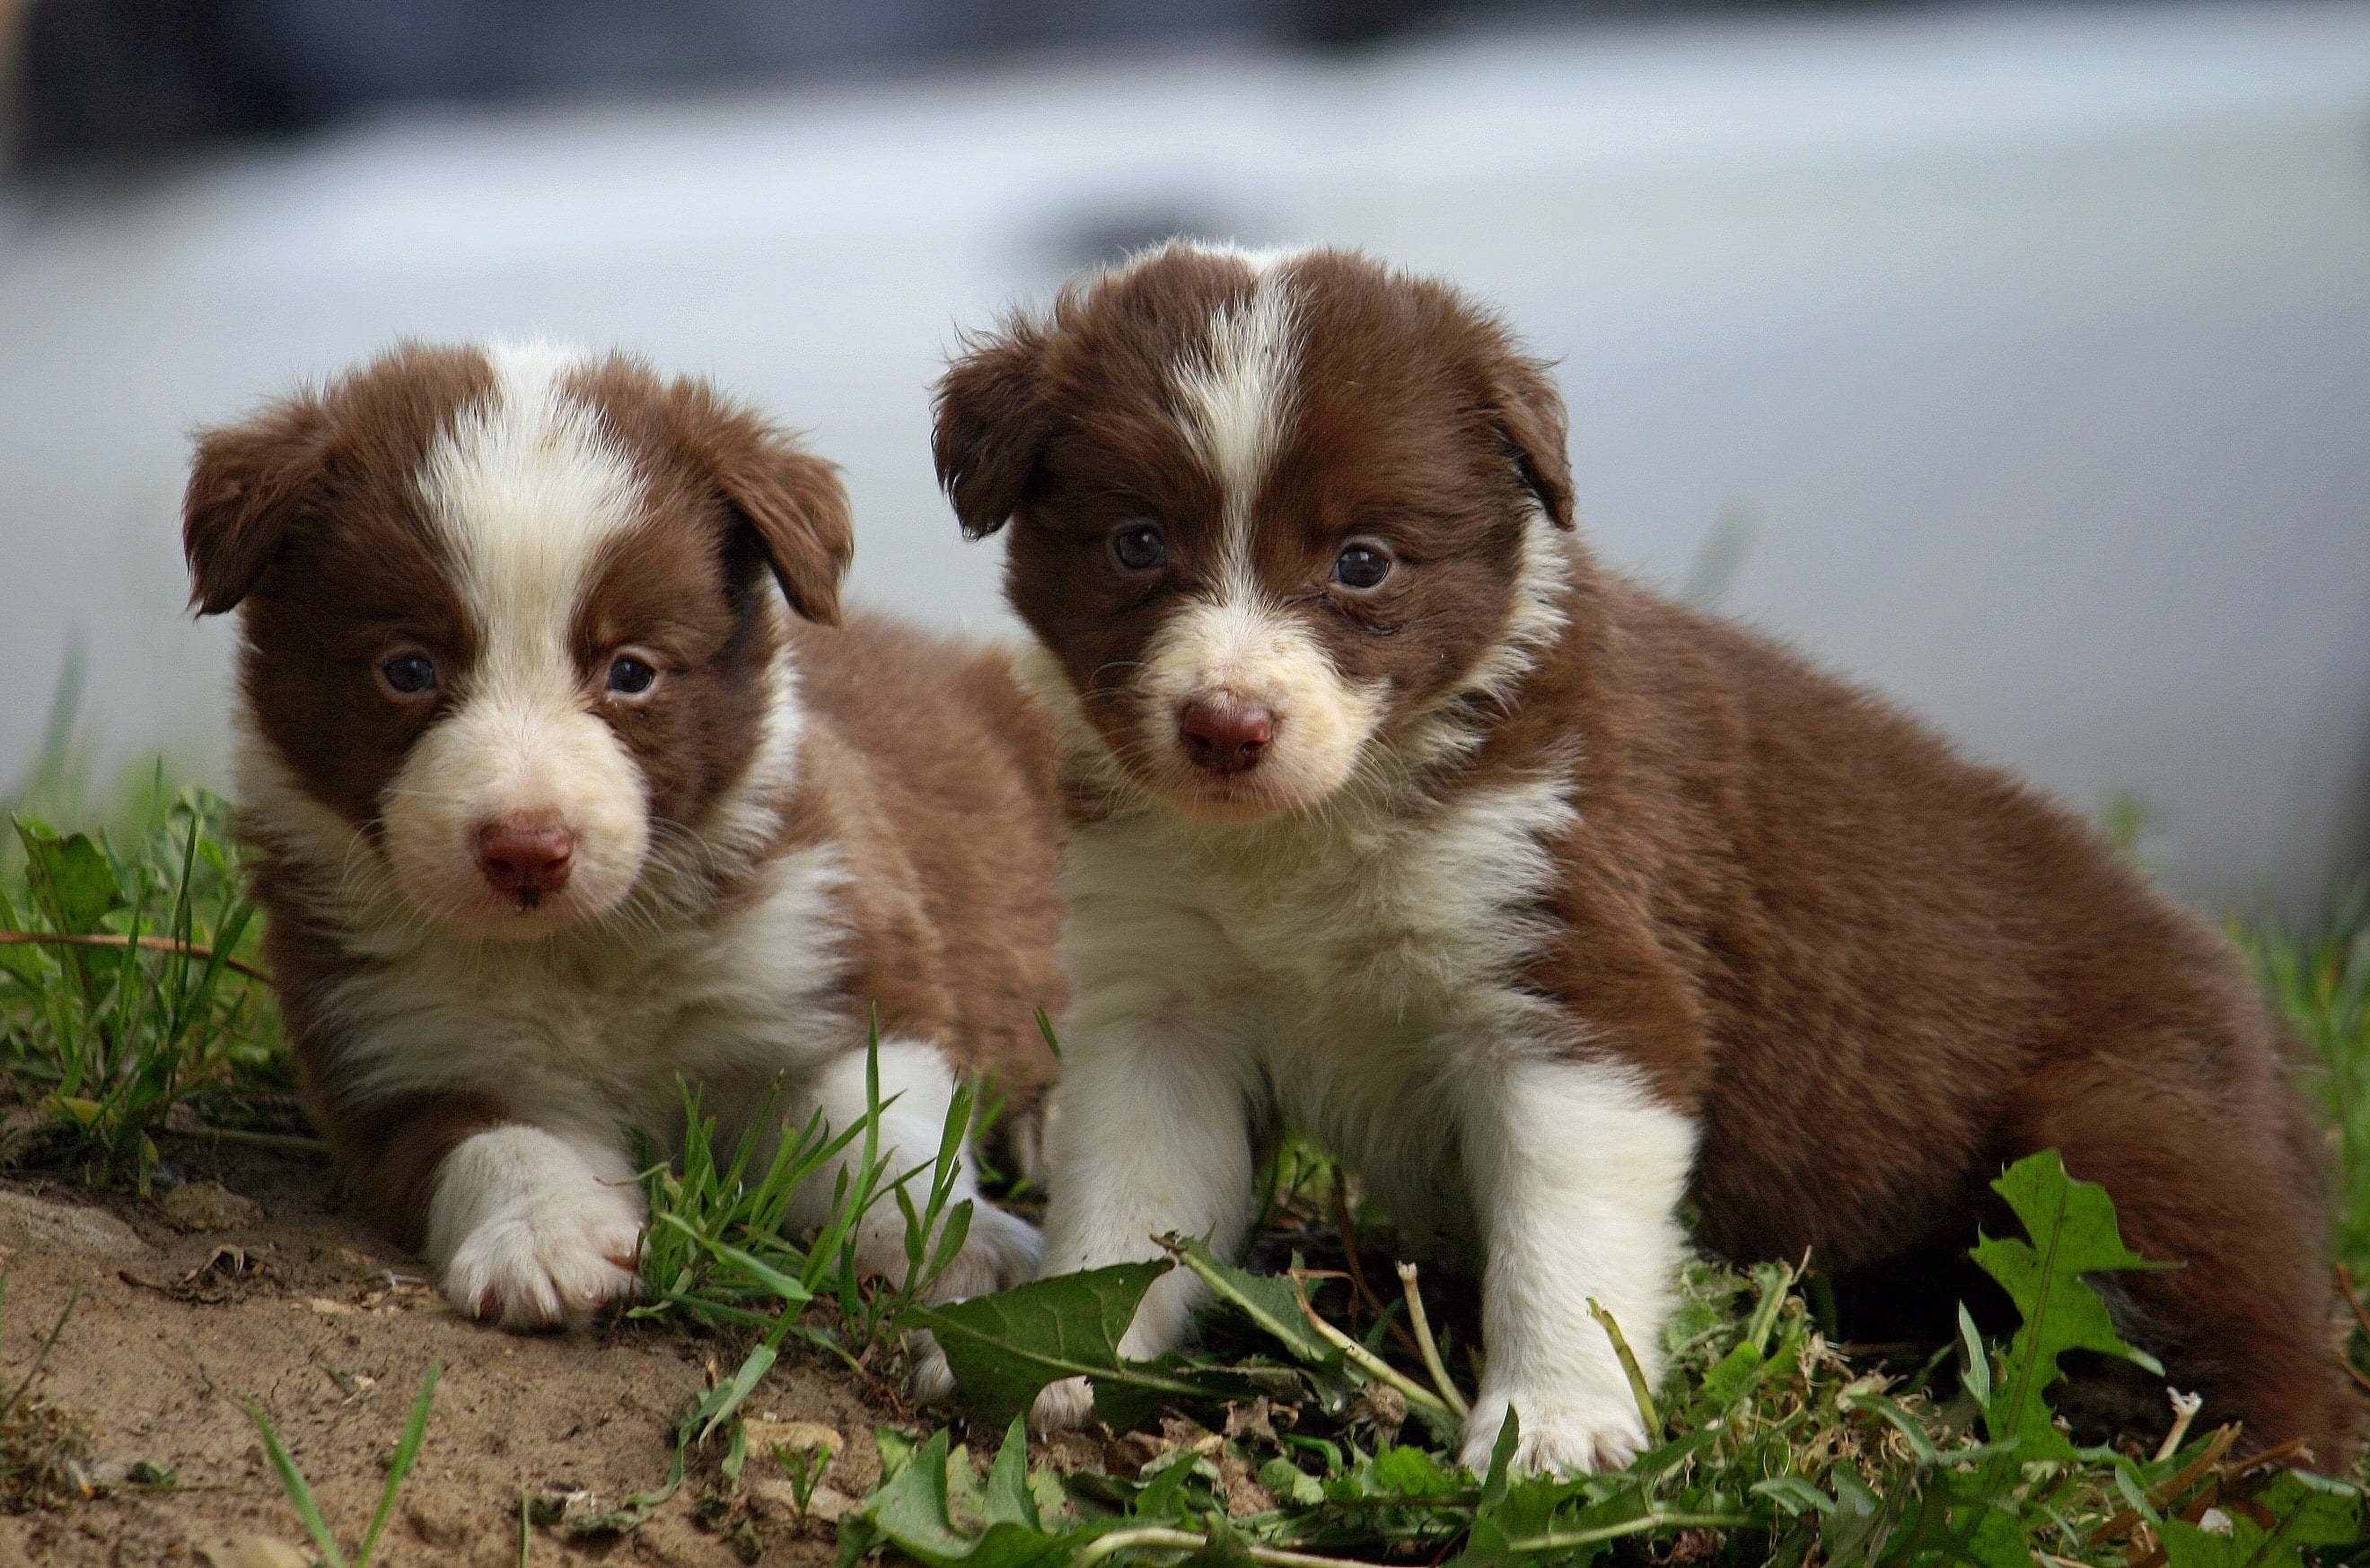 two brown-and-white puppies on grassfield closeup photo